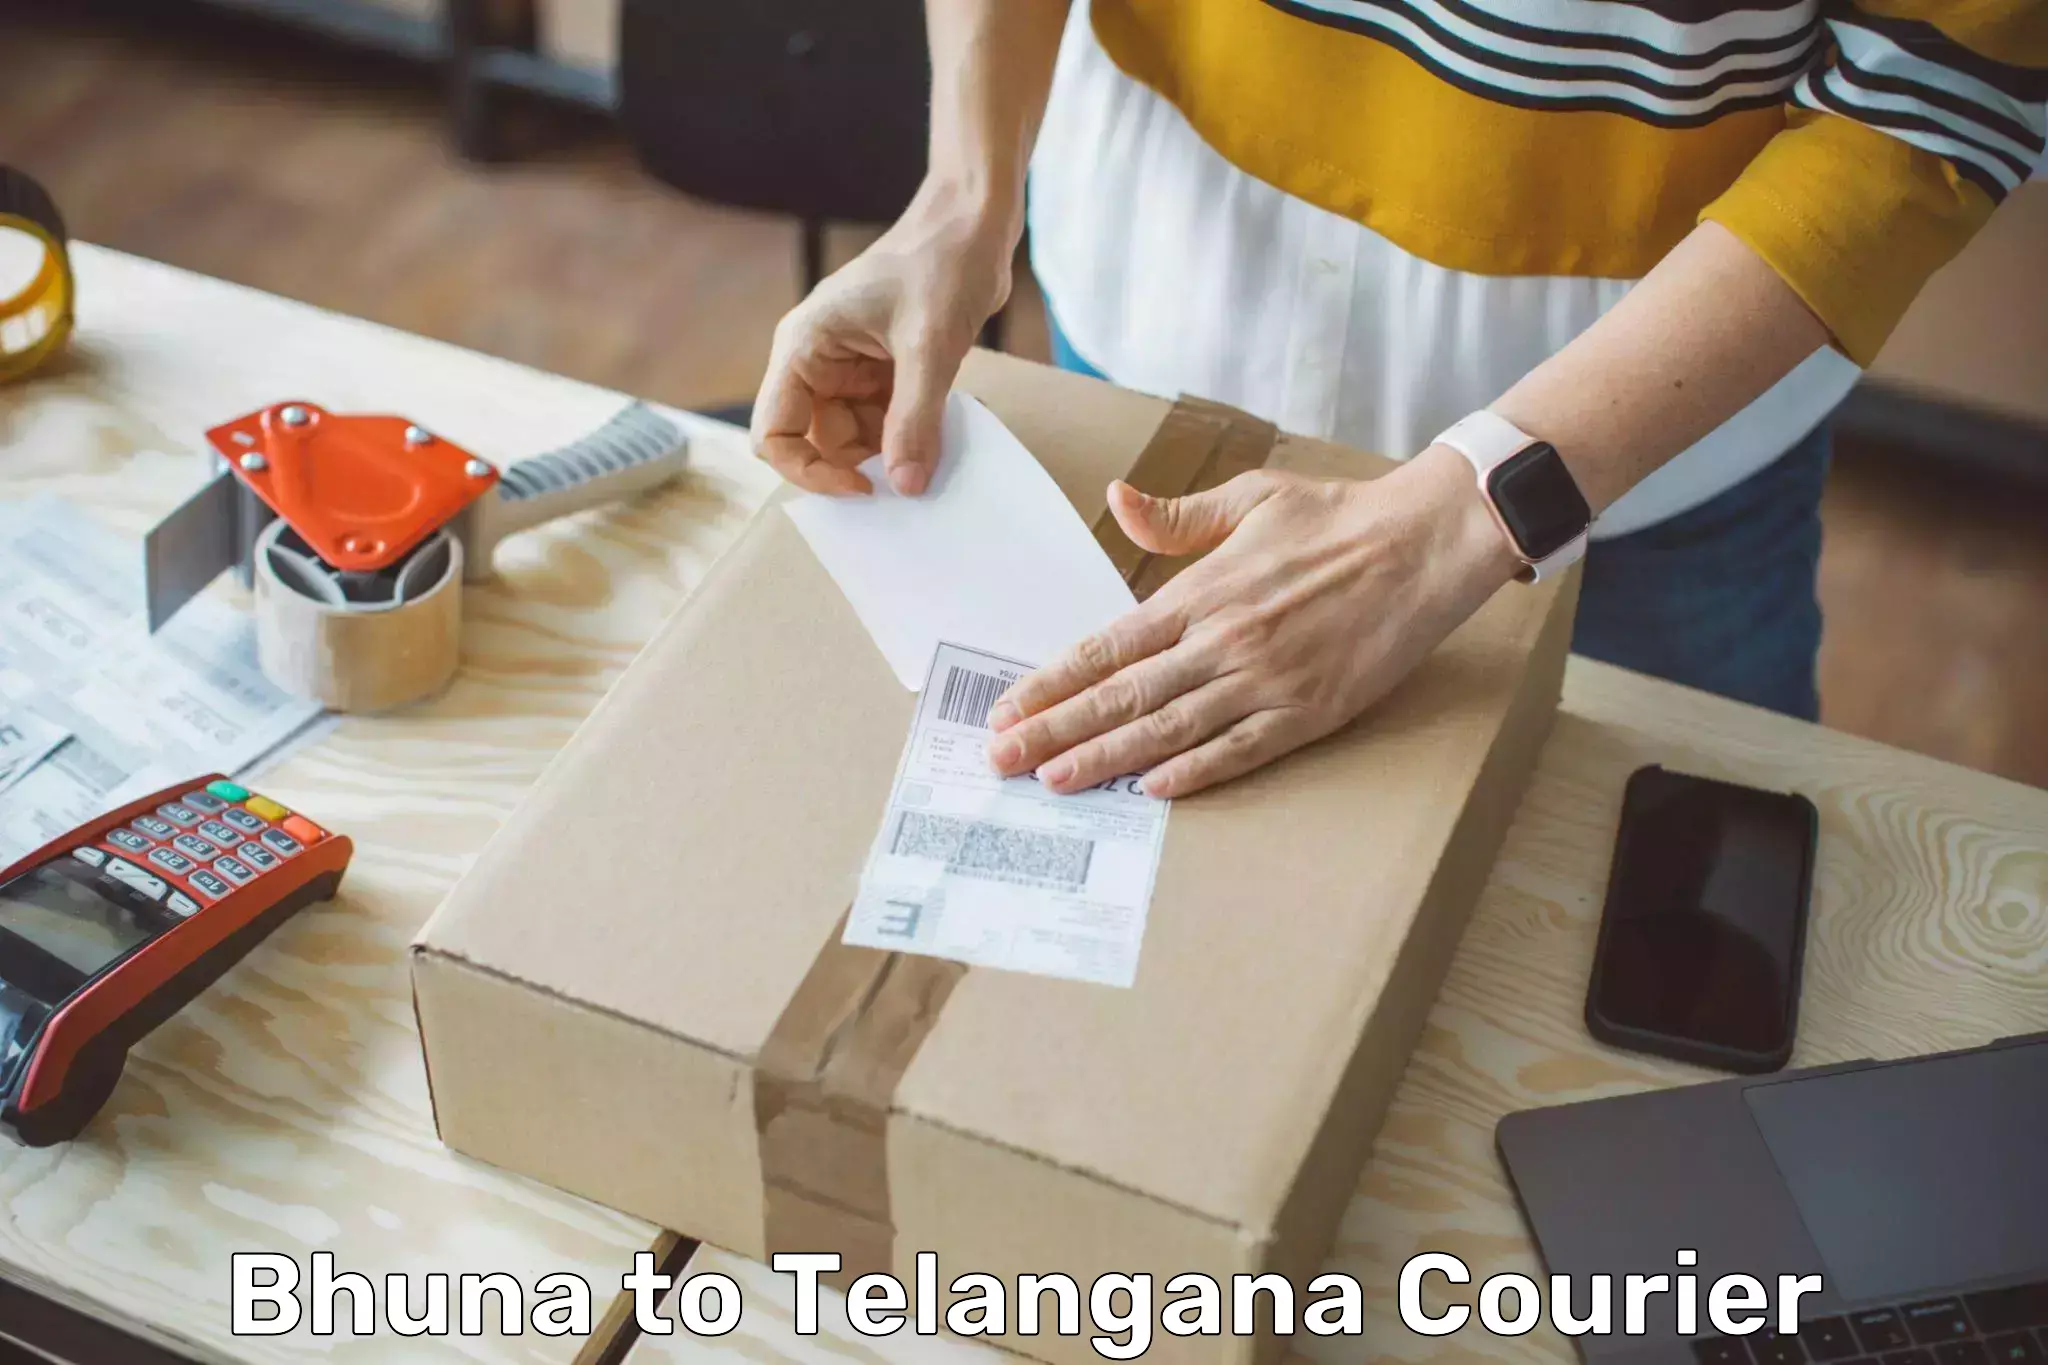 Express delivery network Bhuna to Yellareddy